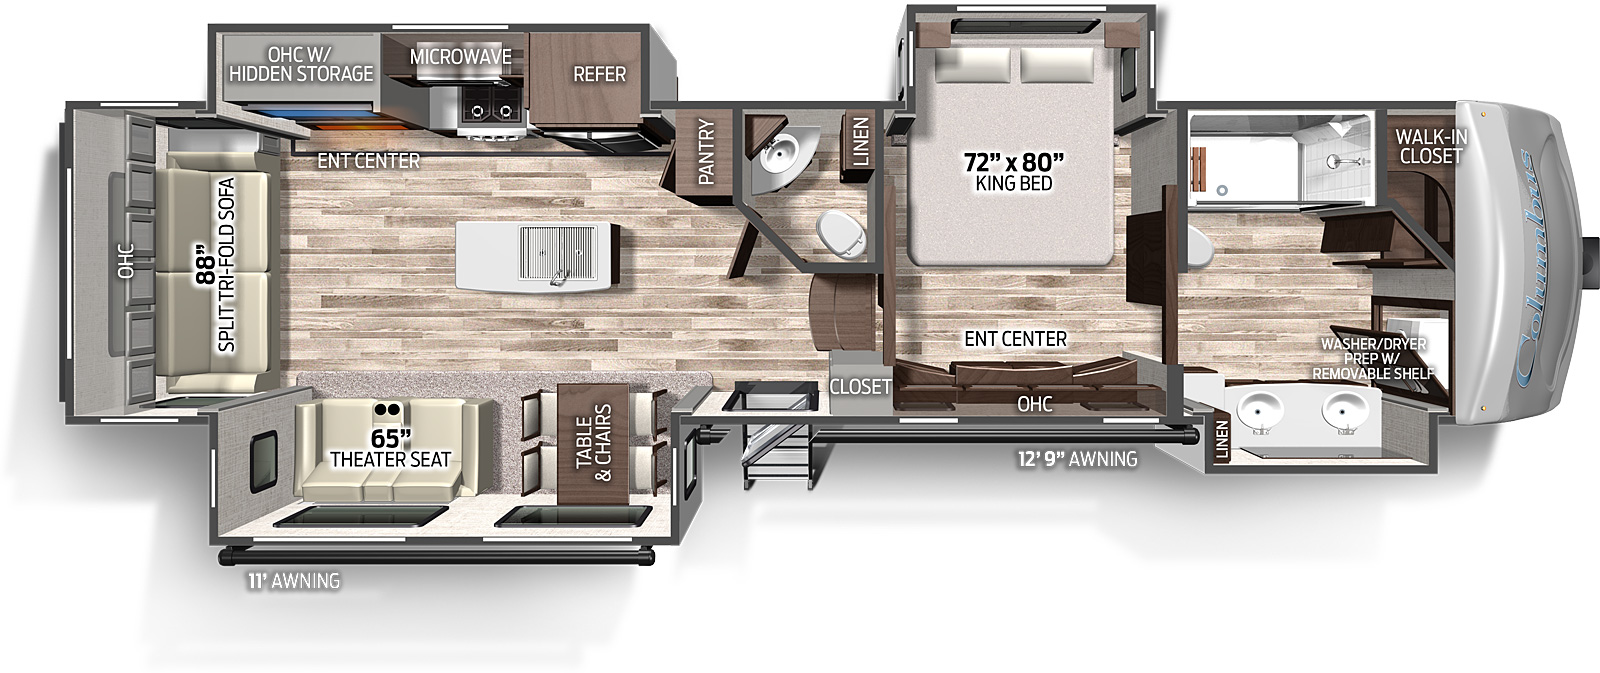 The 383FB has 4 slide outs, 2 on the road side and two on the camp side, along with one entry door on the camp side. Interior layout from front to back: front bathroom with walk in closet and two sinks and cabinets in the camp side slide out, bedroom with king size bed in the road side slide out, half bath, kitchen dining, living area with the road side slide out containing residential refrigerator, cooktop with oven and overhead microwave, TV entertainment area; The camp side slide out containing freestanding table and chairs and theater seating. 